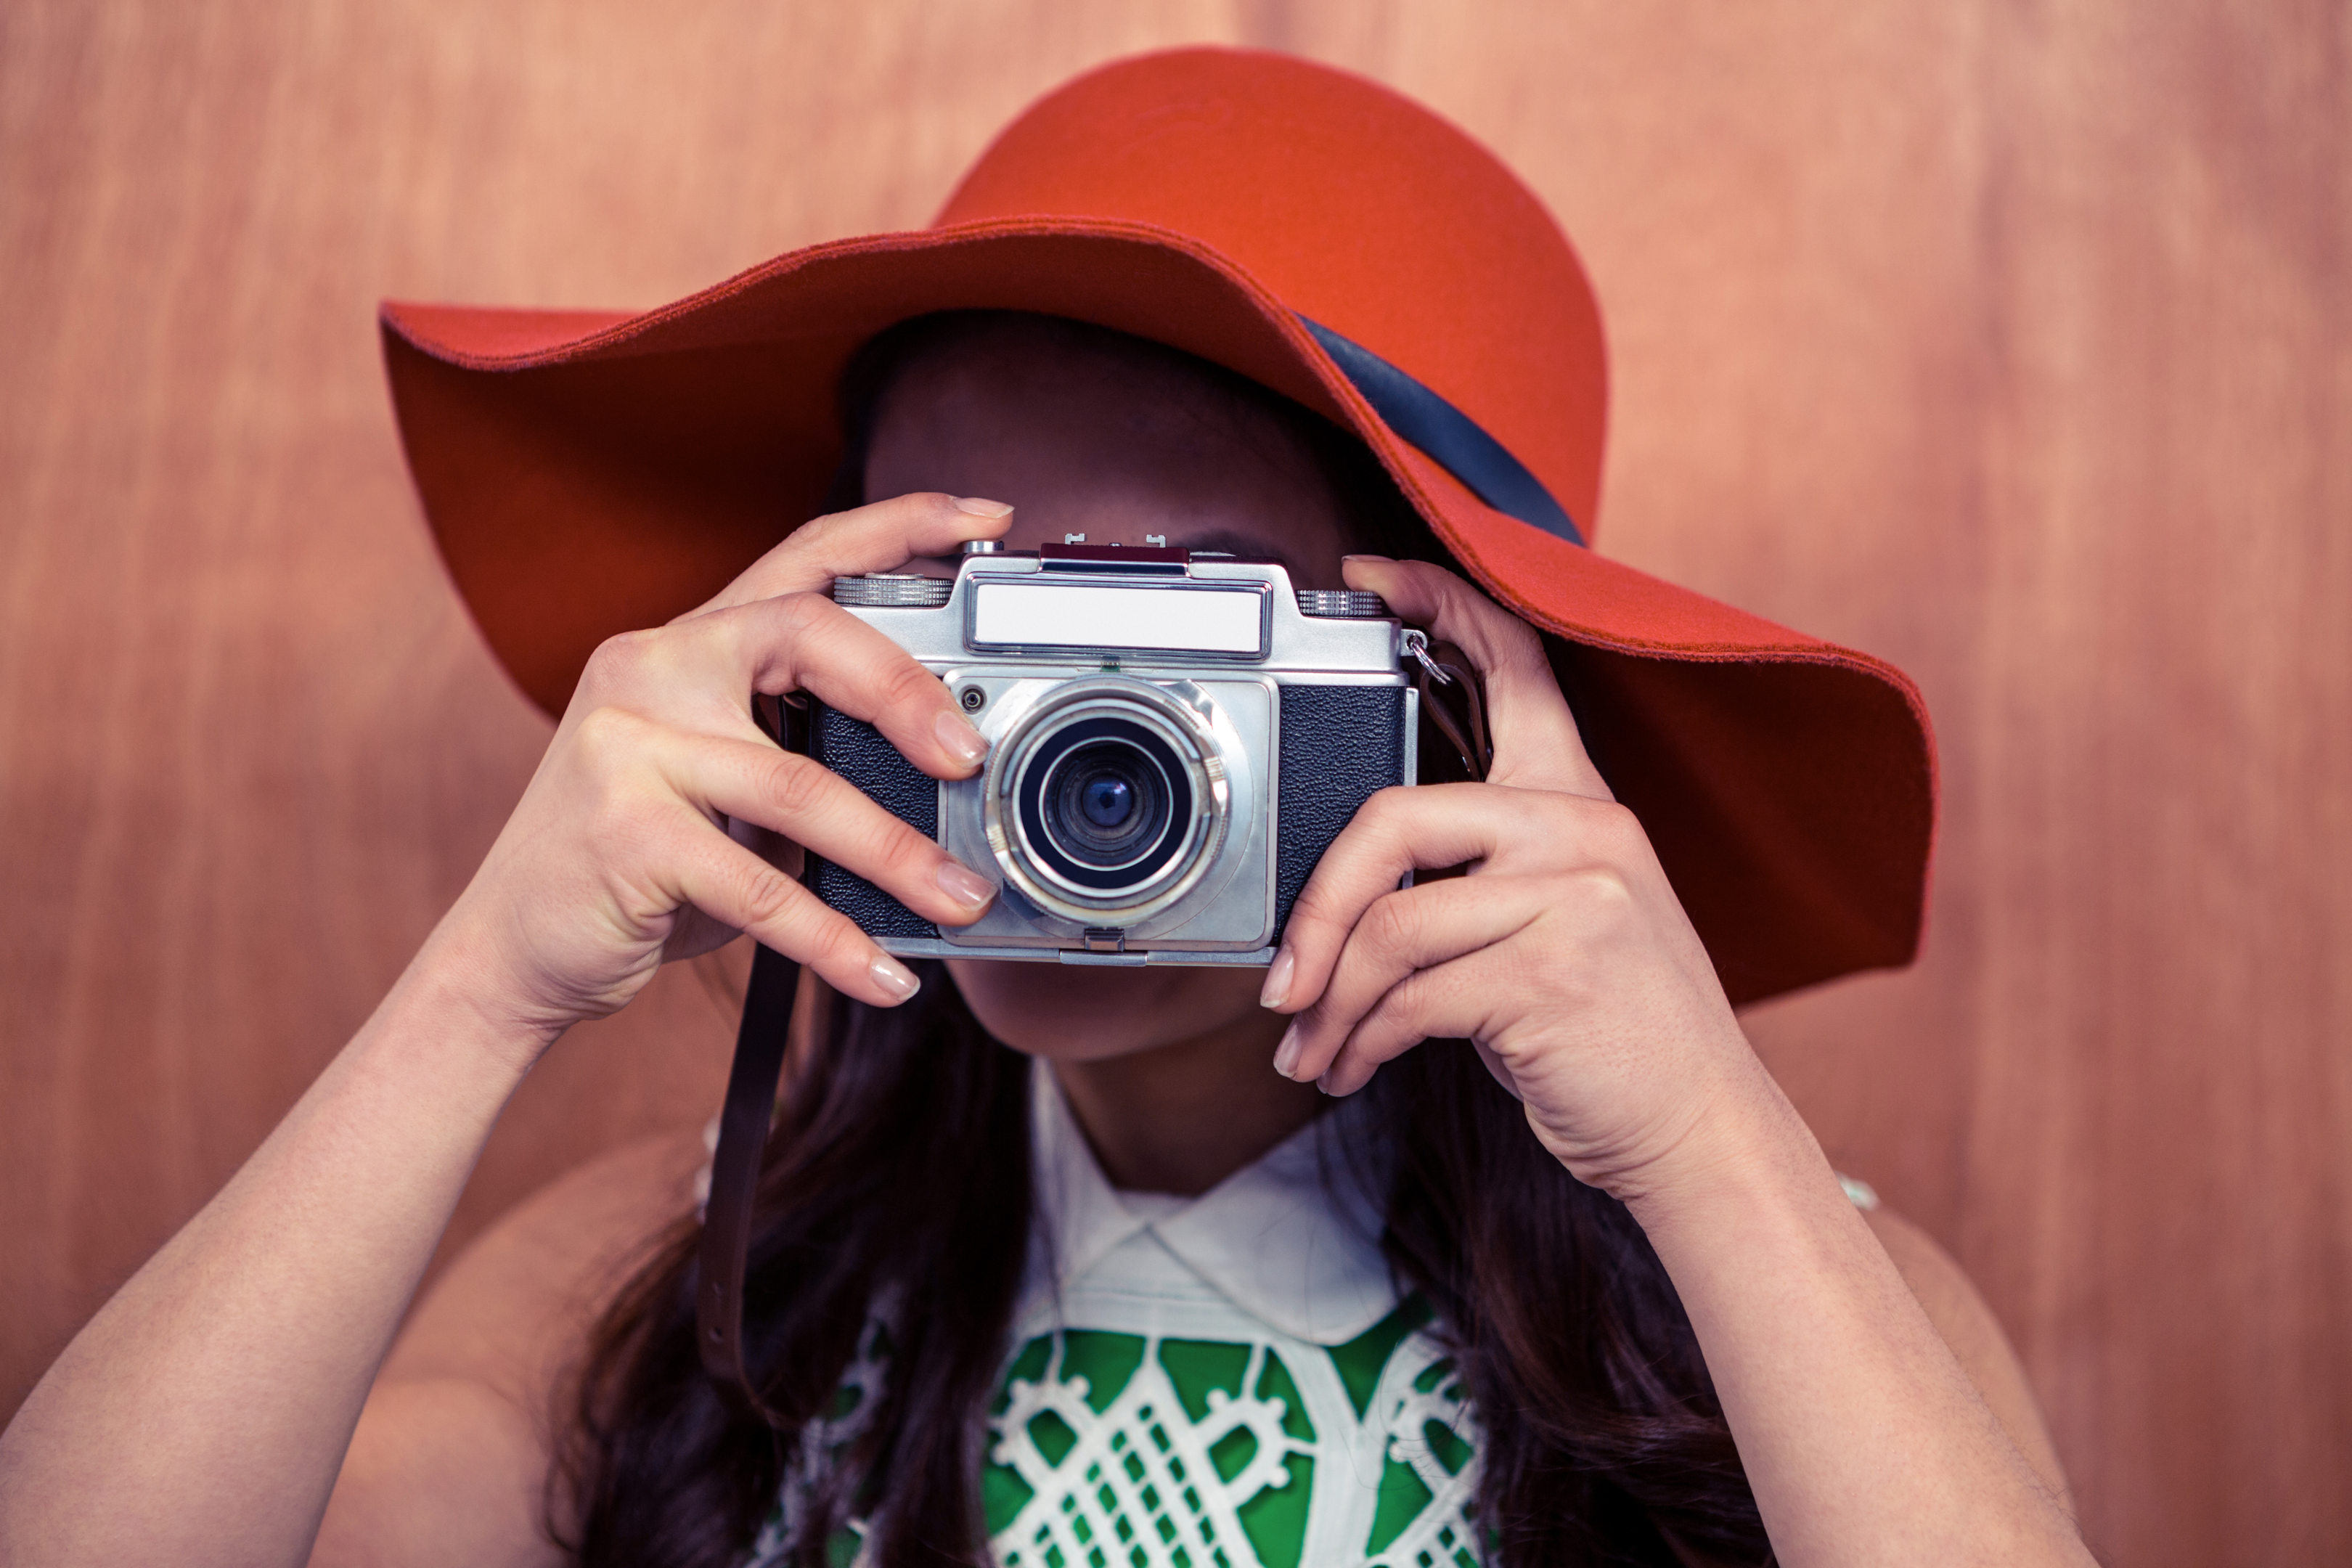 Fotoleinwand kaufen (https://elements.envato.com/woman-with-hat-taking-photograph-with-camera-again-P6JSJNA)